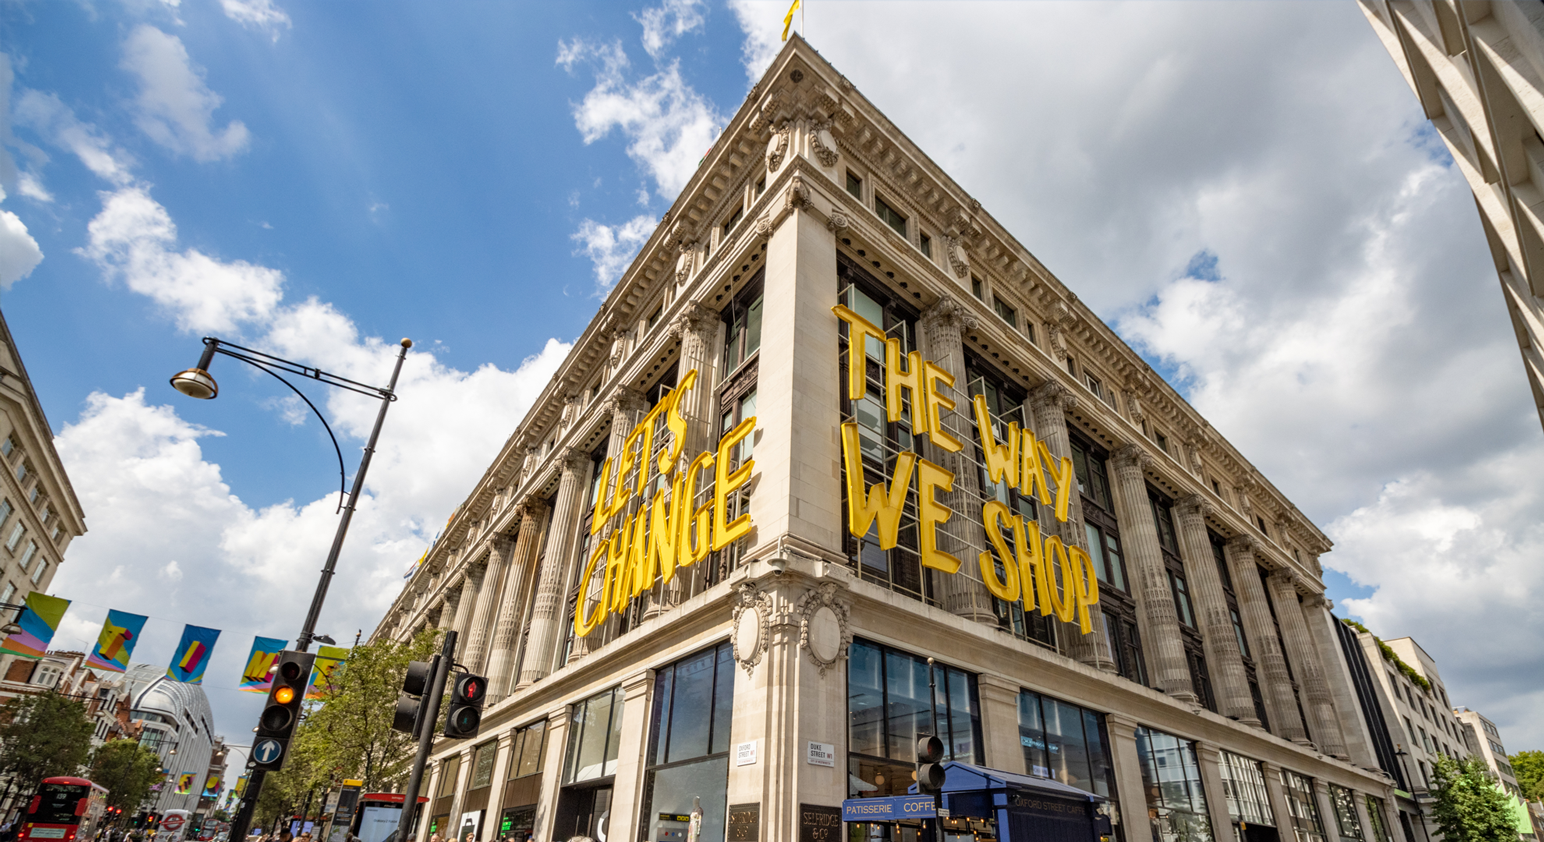 The outside of a large shop building, with the text "Let's change the way we shop"